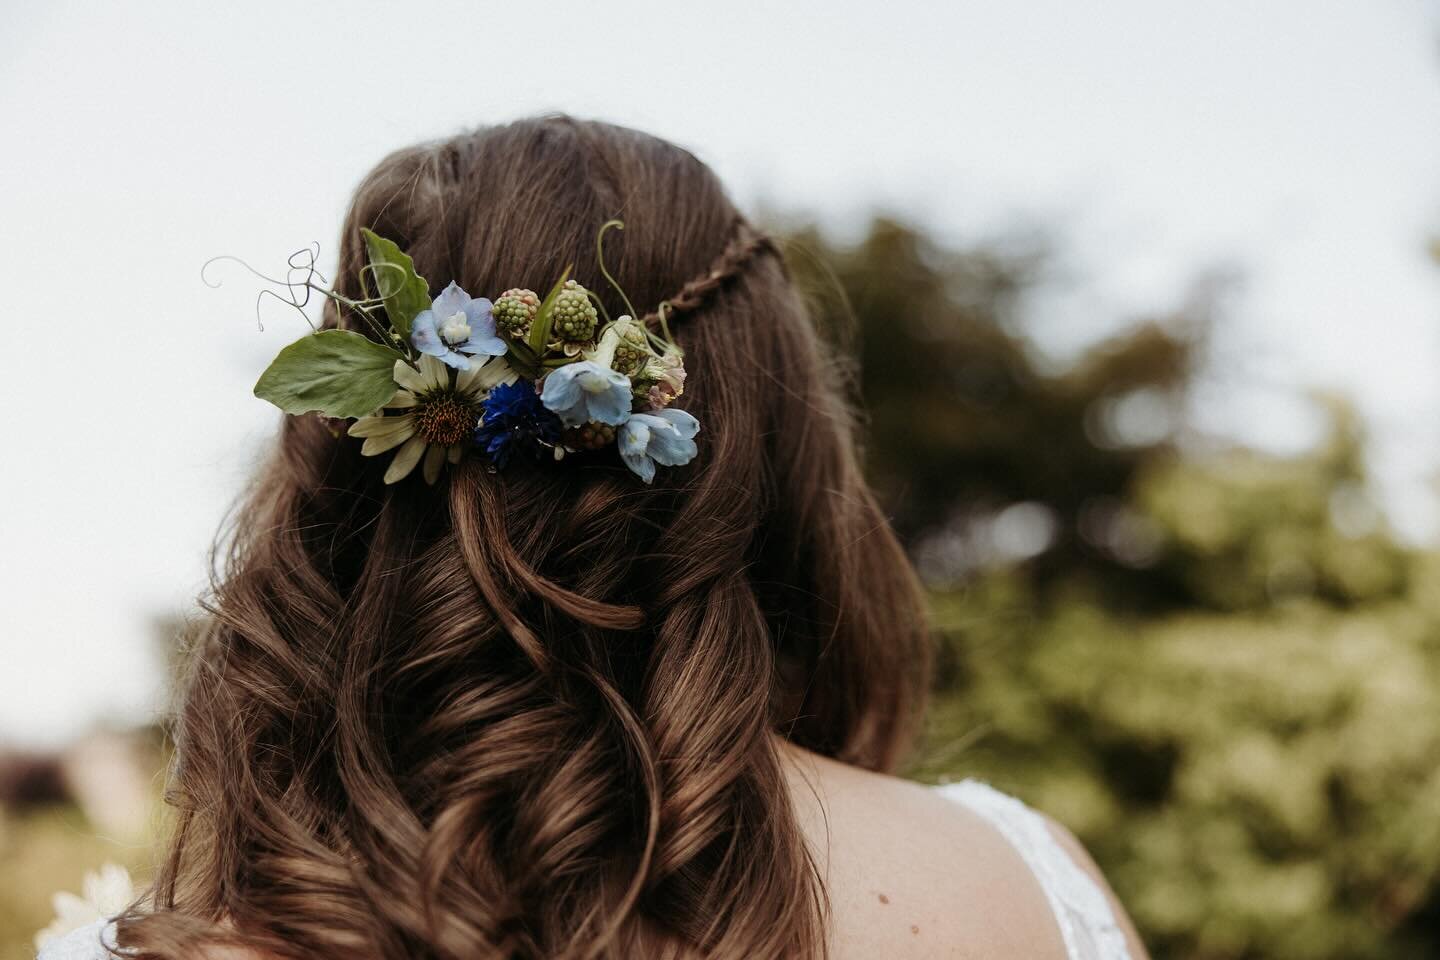 Flowers make the best hair pieces! The wispy sweet pea vines are my favourite 🥰